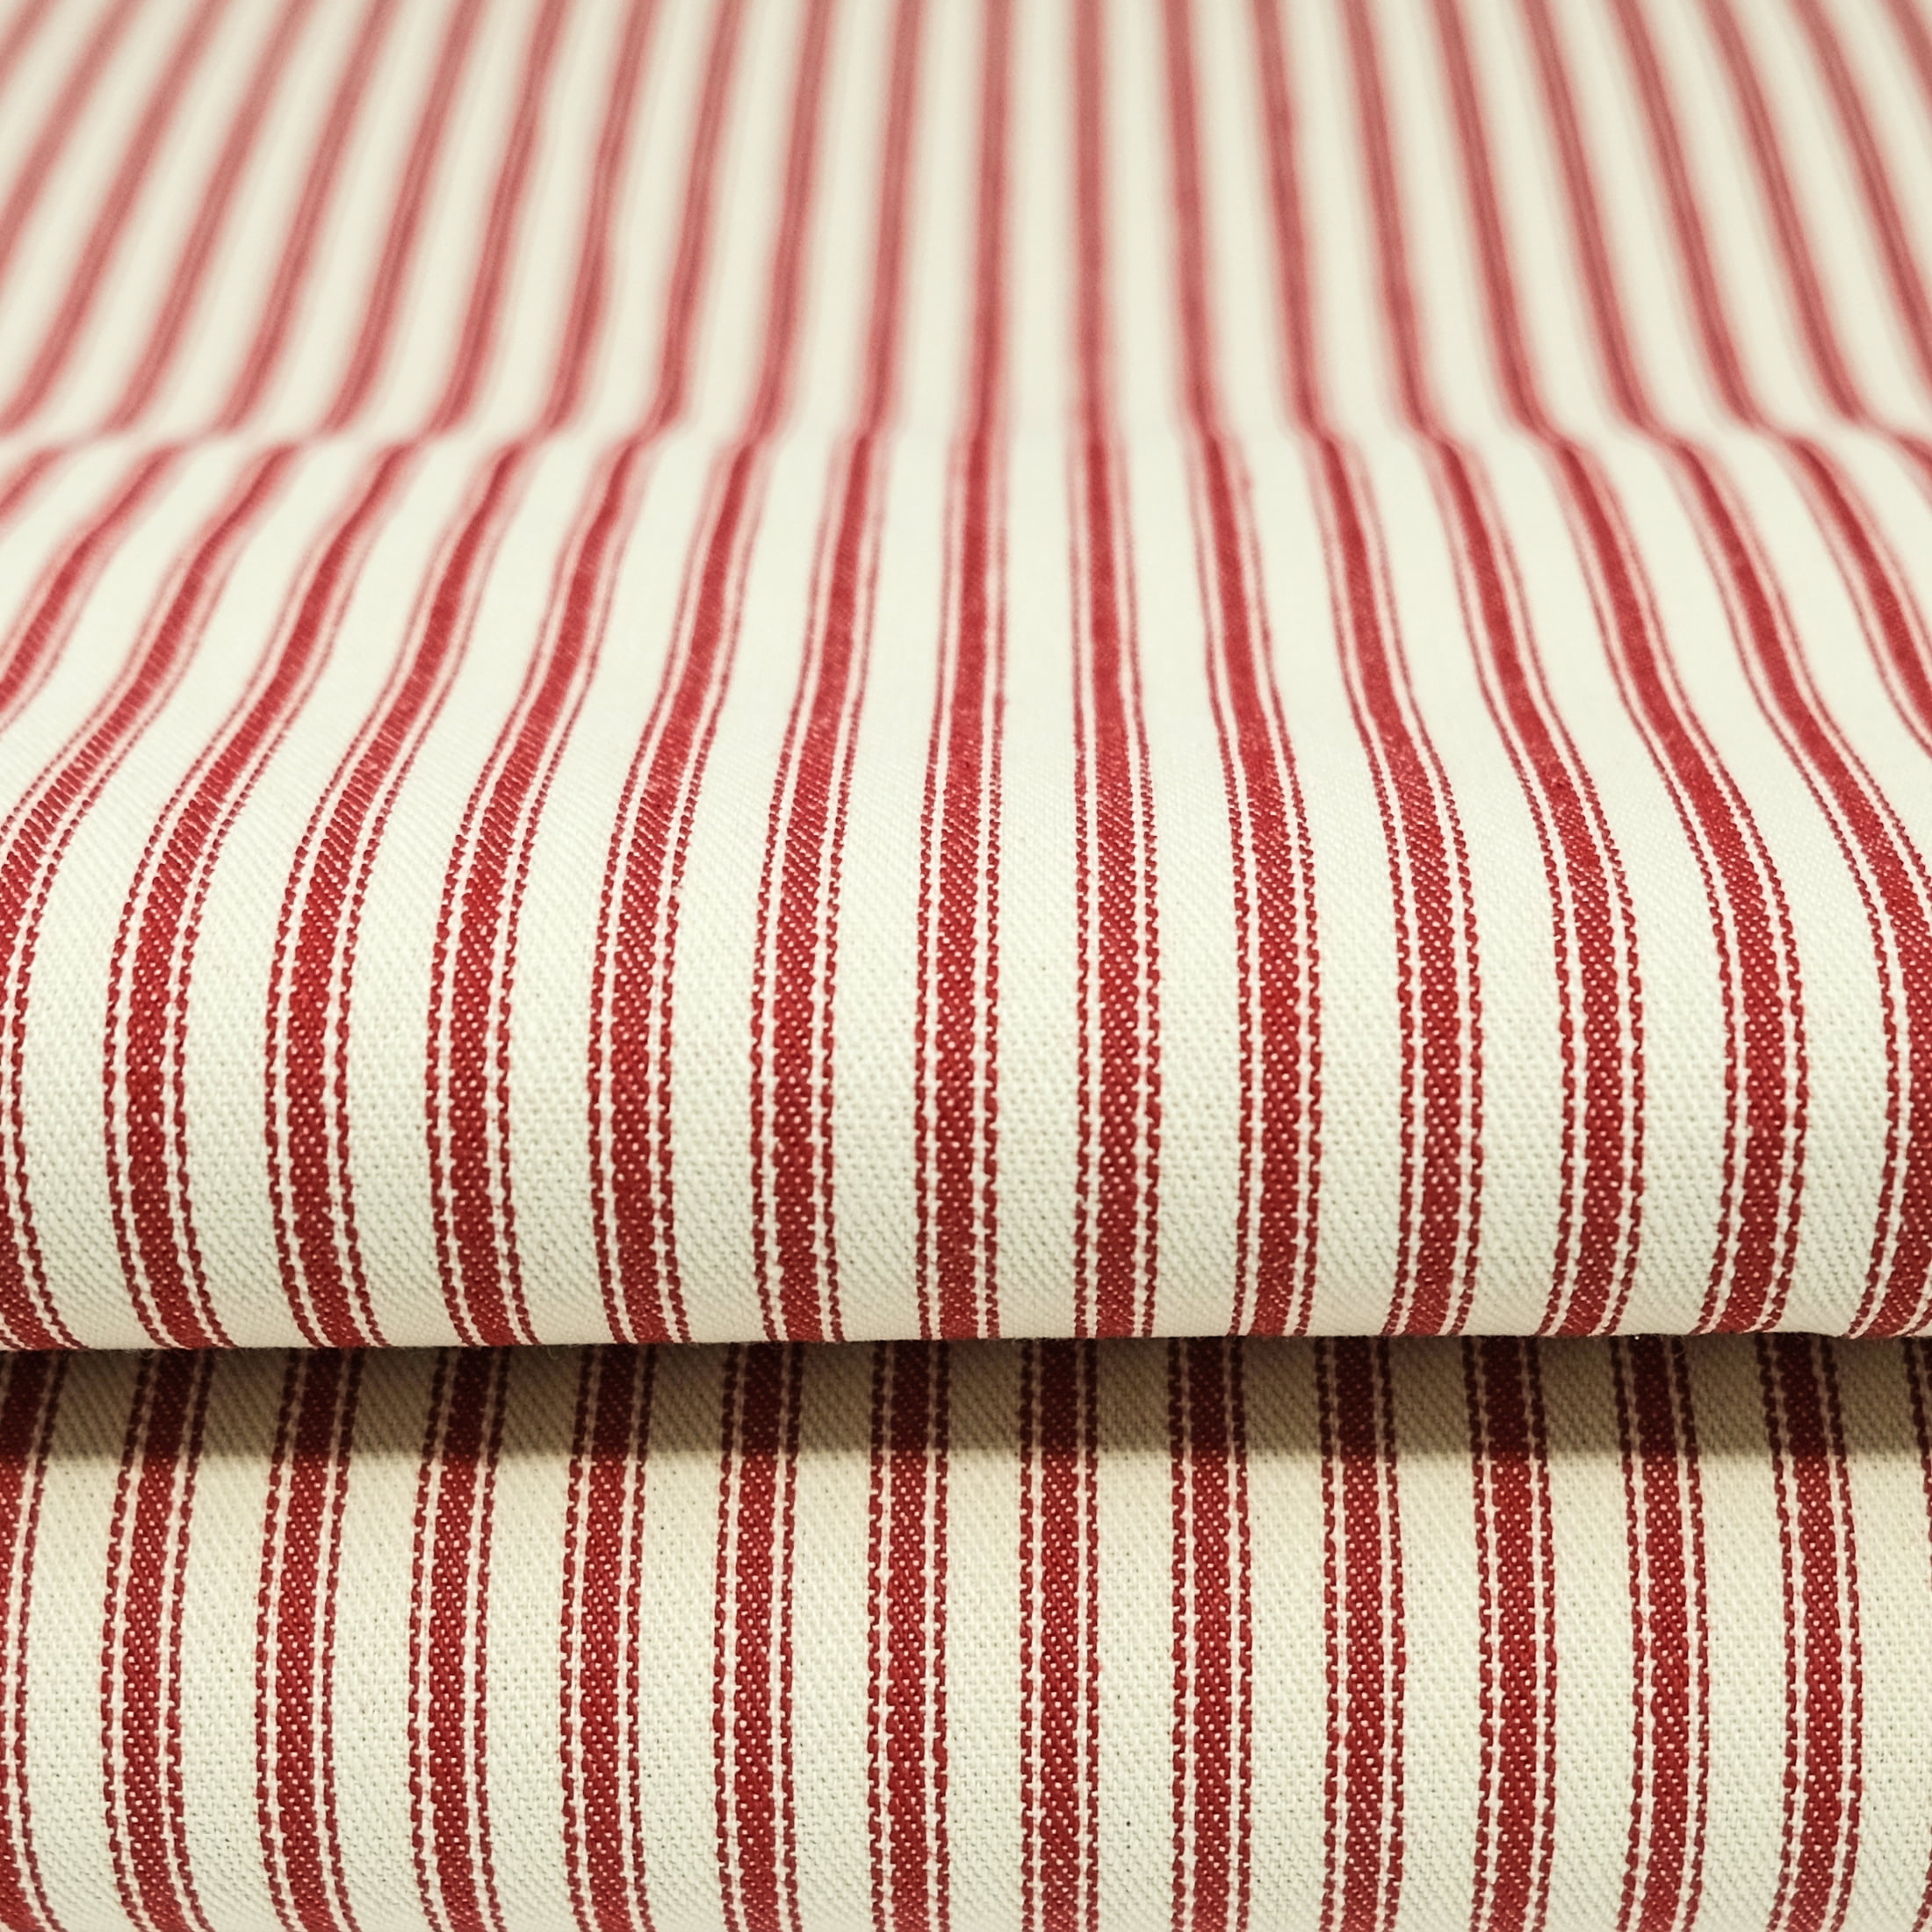 Roc-Ion Vintage Inspired Red Cotton Twill Ticking Stripe Material Sold By  The Yard - Kittredge Mercantile